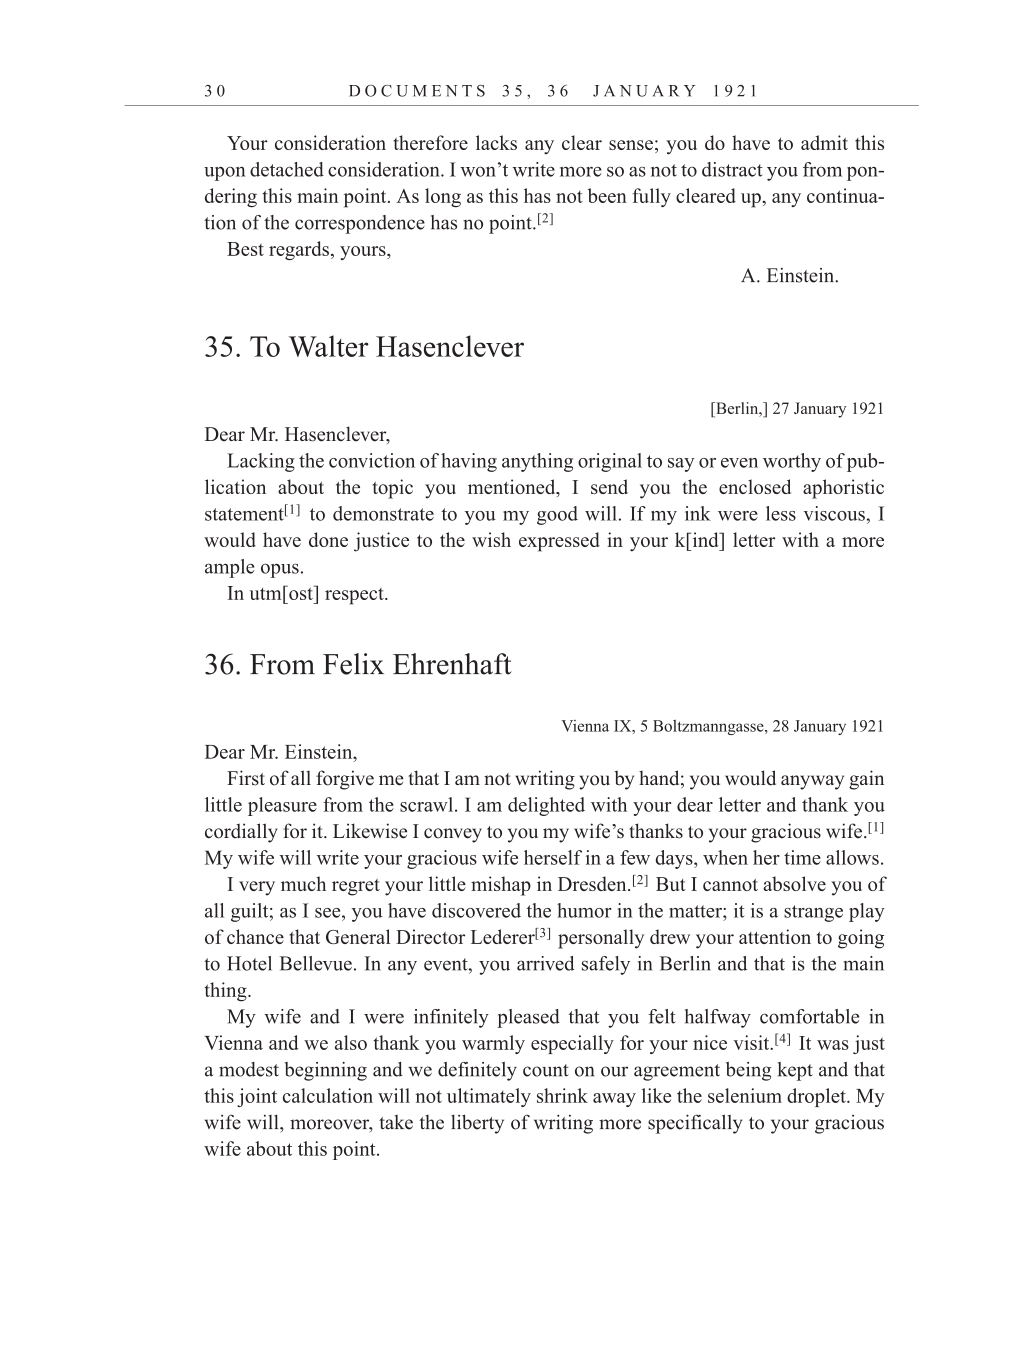 Volume 12: The Berlin Years: Correspondence, January-December 1921 (English translation supplement) page 30